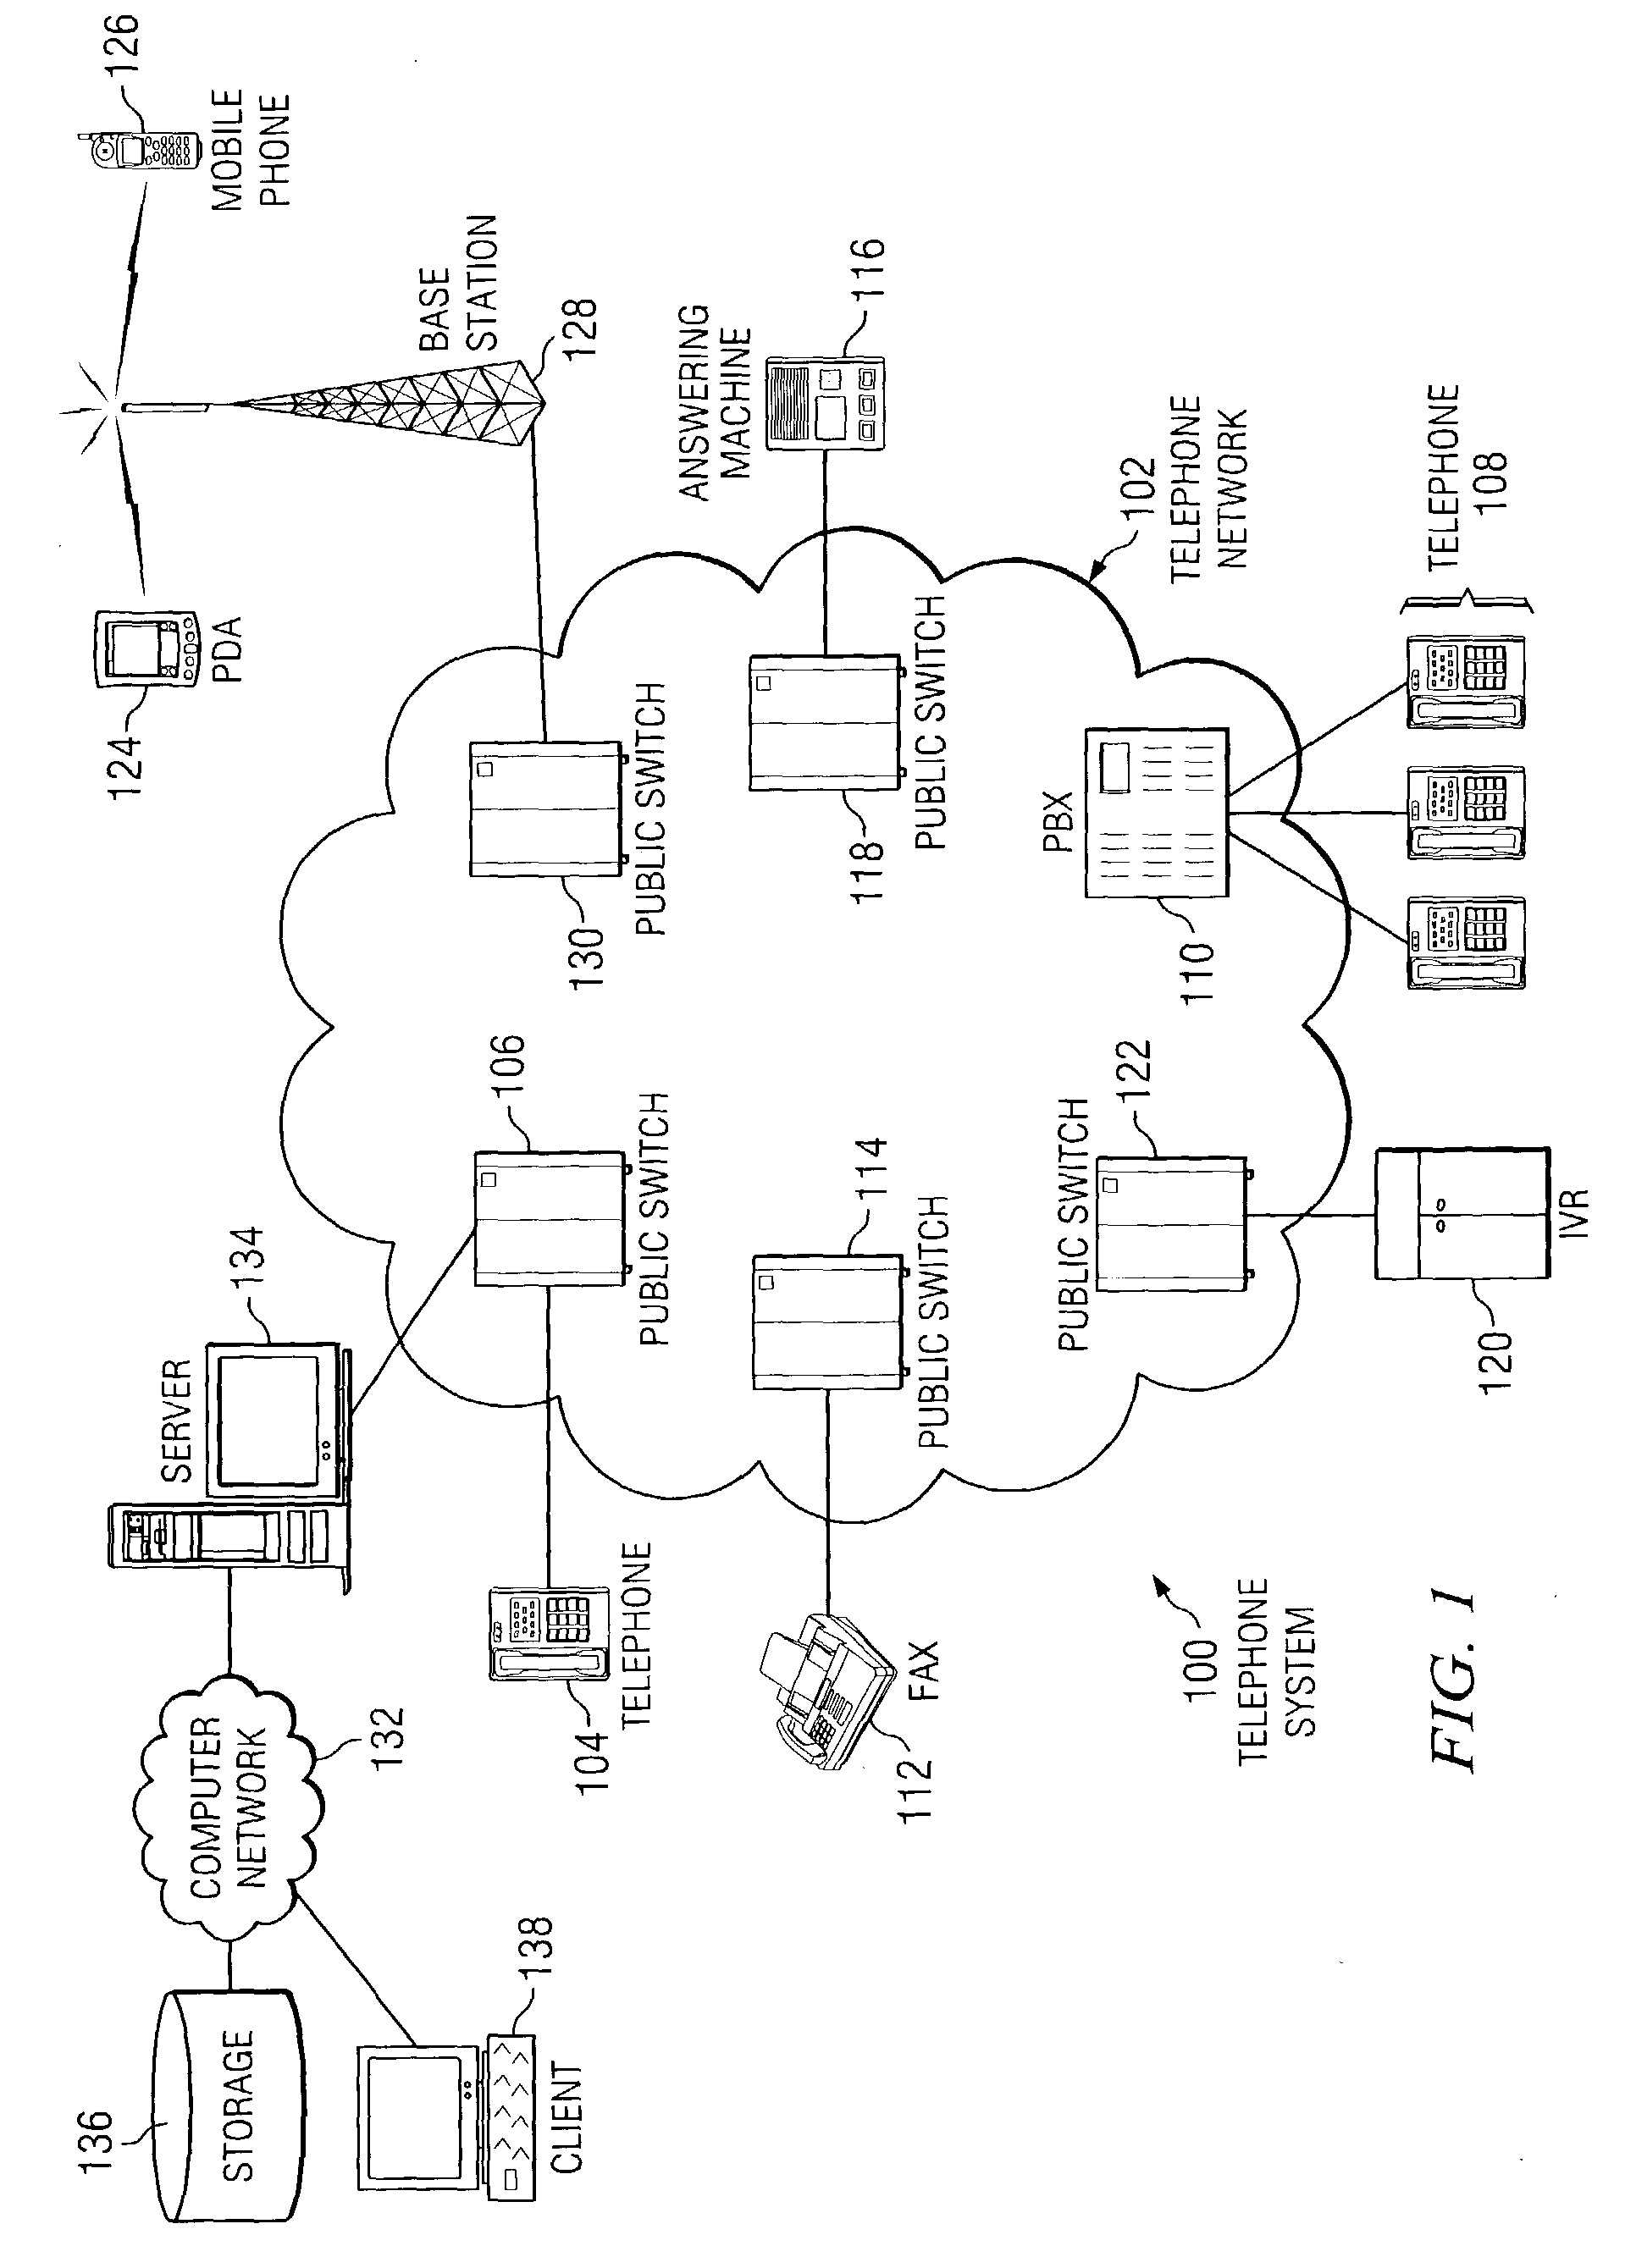 Method and apparatus for providing secured communication connections using a secured communication connection object